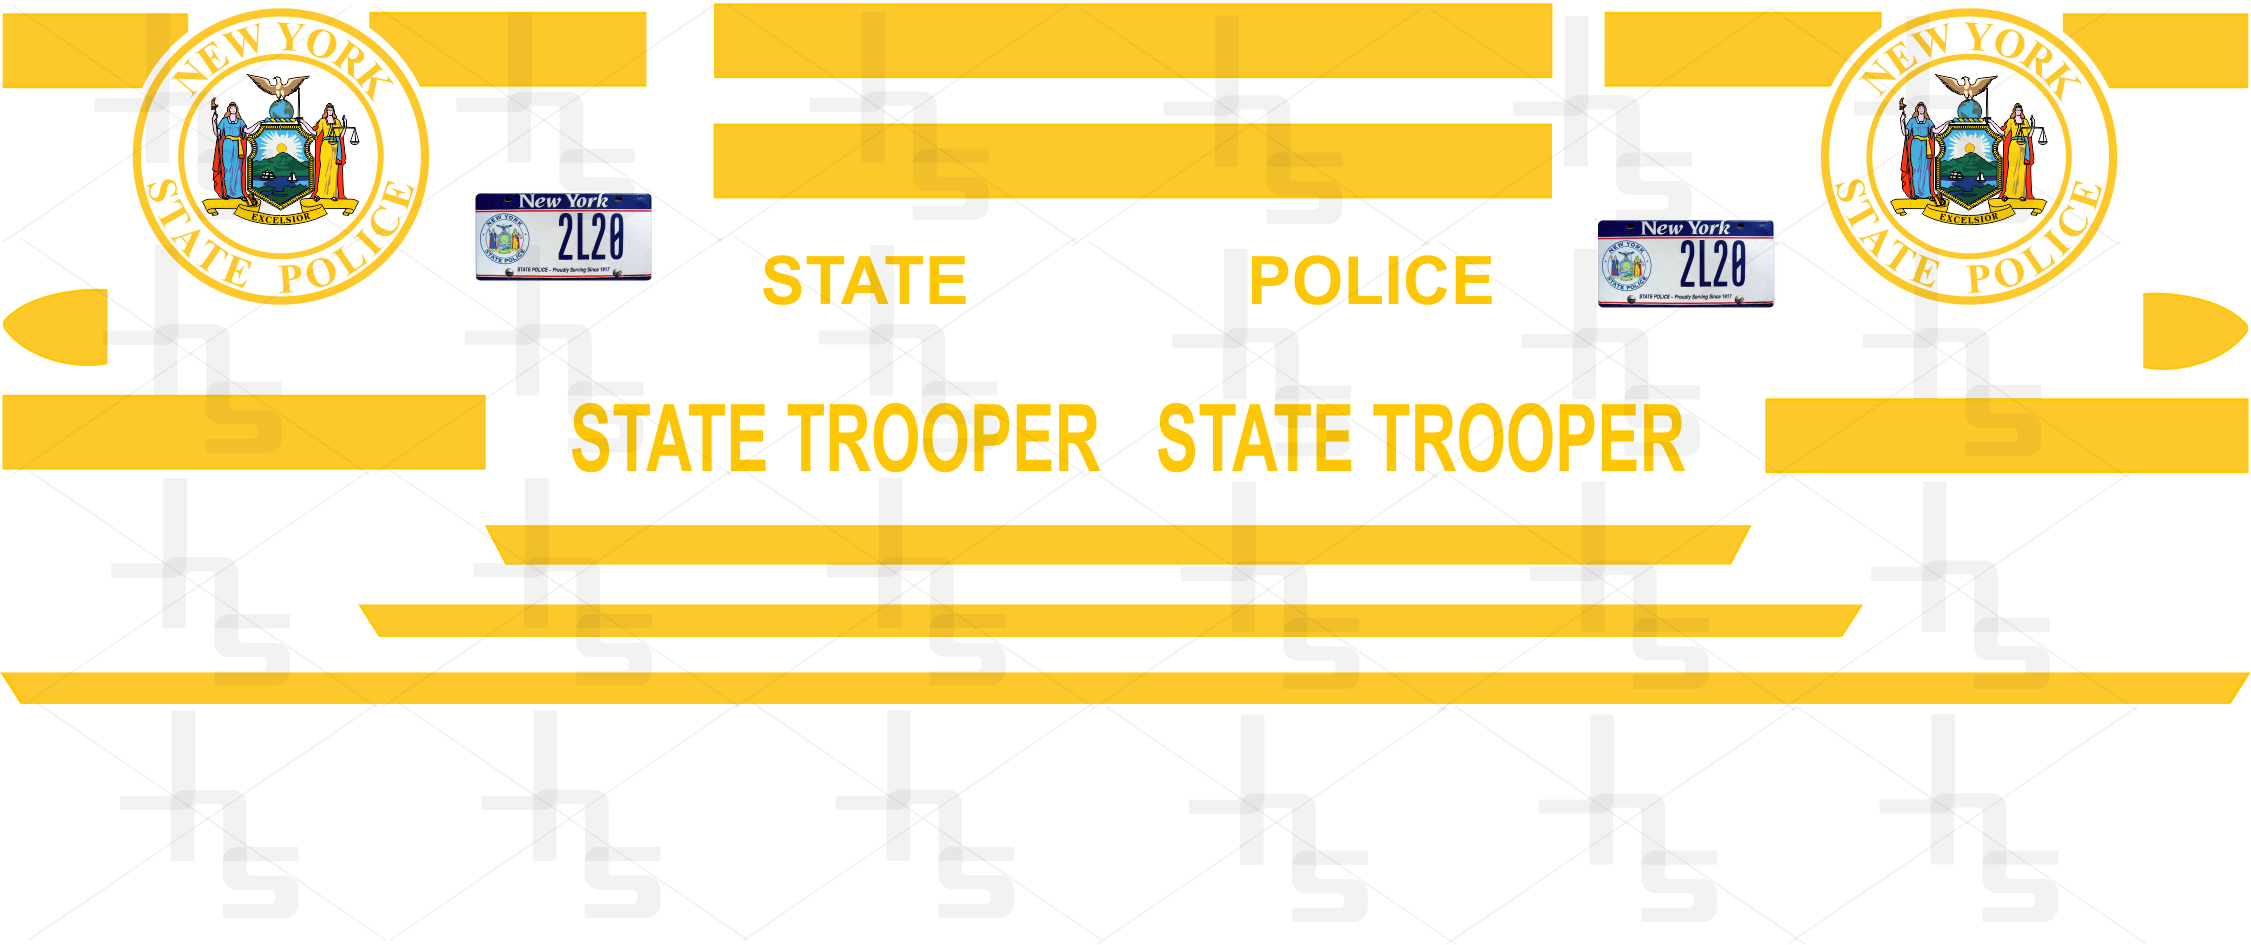 1/18 New York State Police waterslide decals